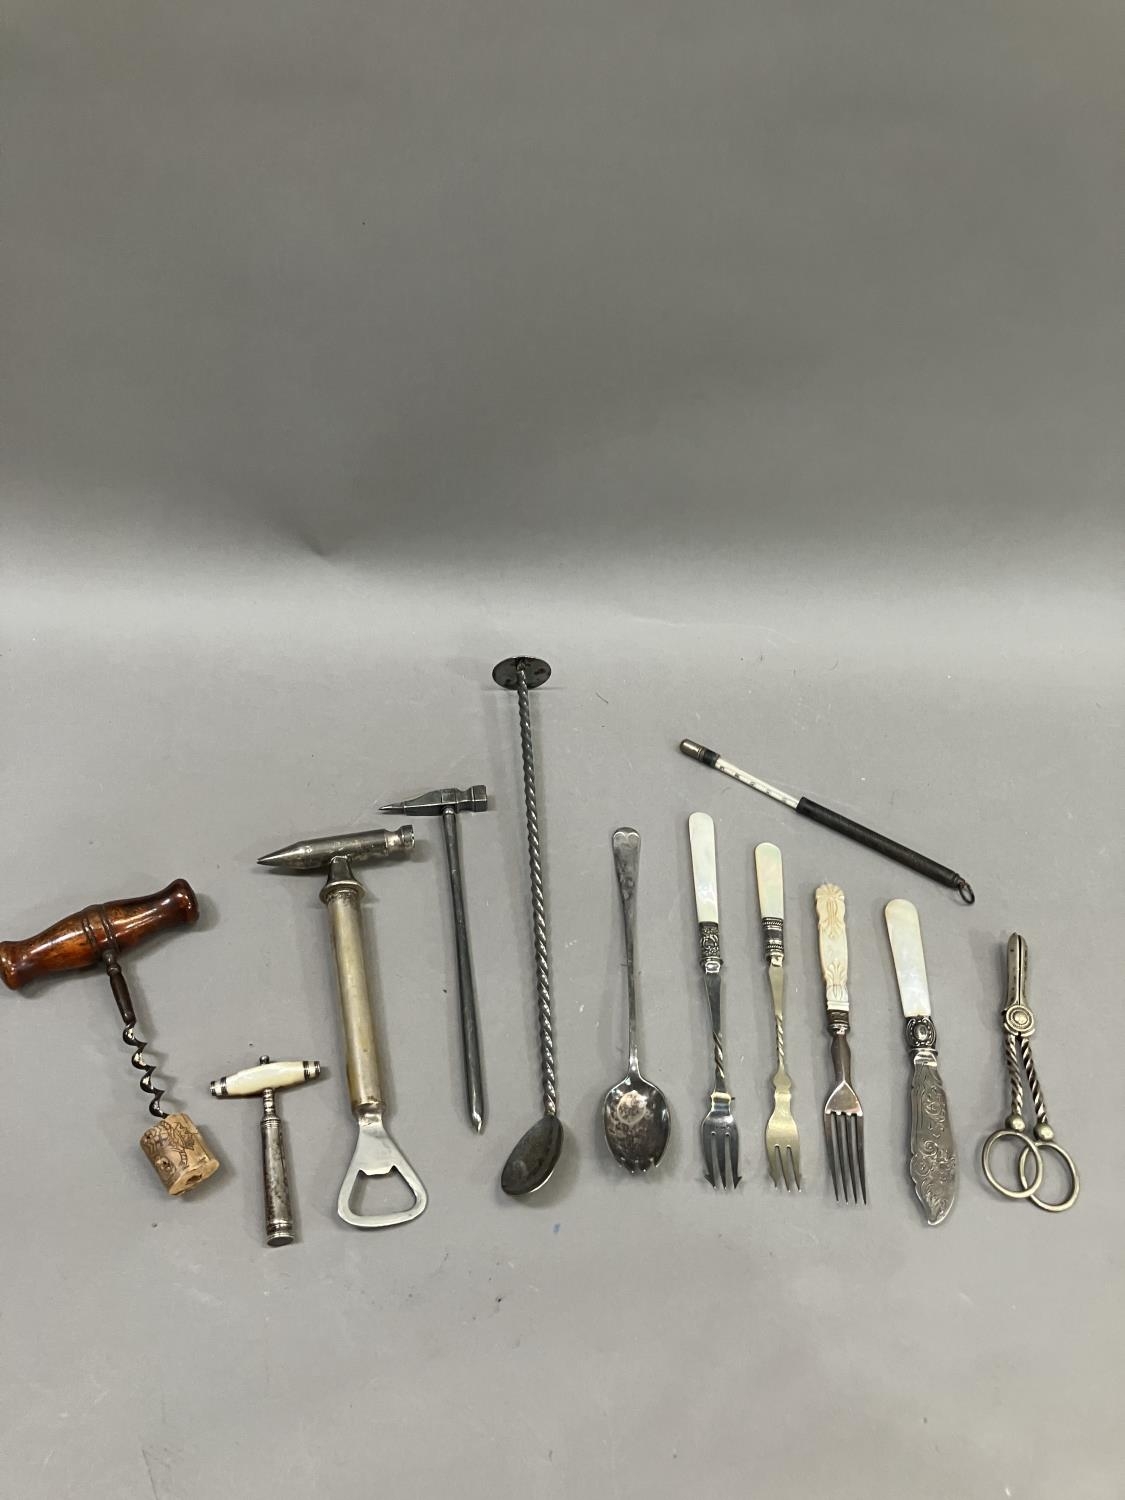 19th century and early 20th century corkscrews including a wooden handled example possibly lignum